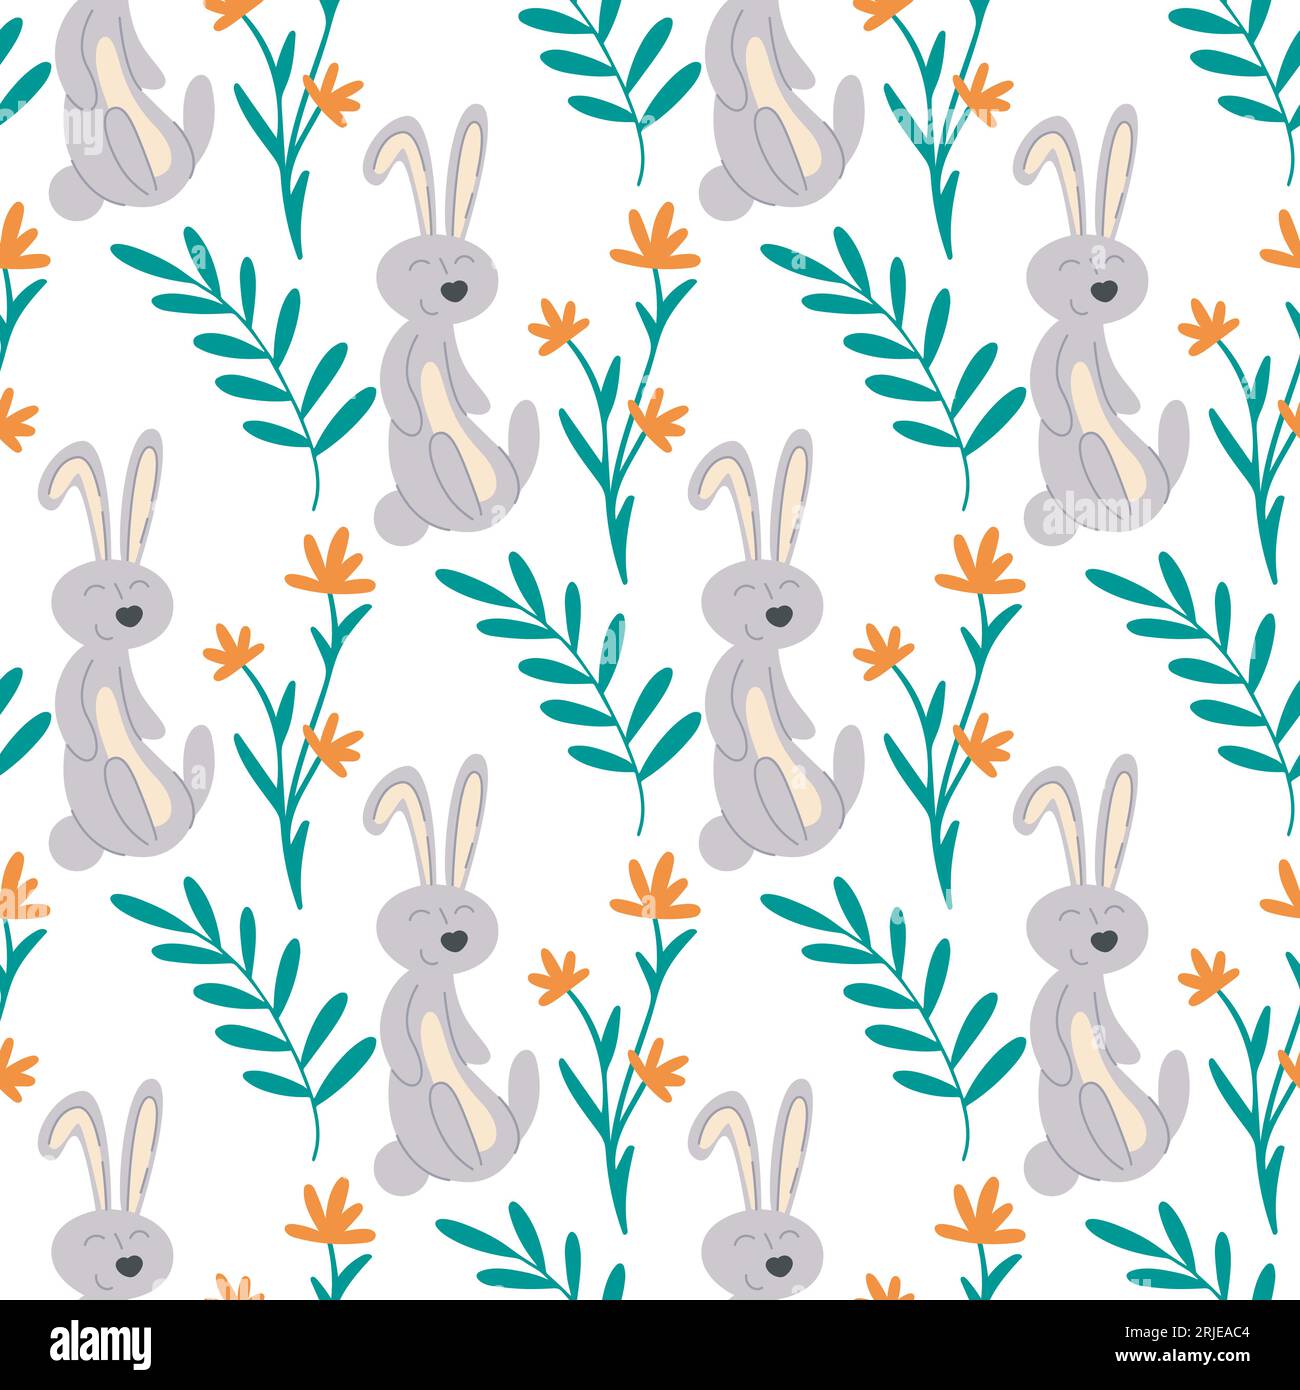 Cute bunnies in flowers and herbs seamless pattern. Baby background with hares and meadow grasses. Print with rabbits and wildflowers bloom Stock Vector